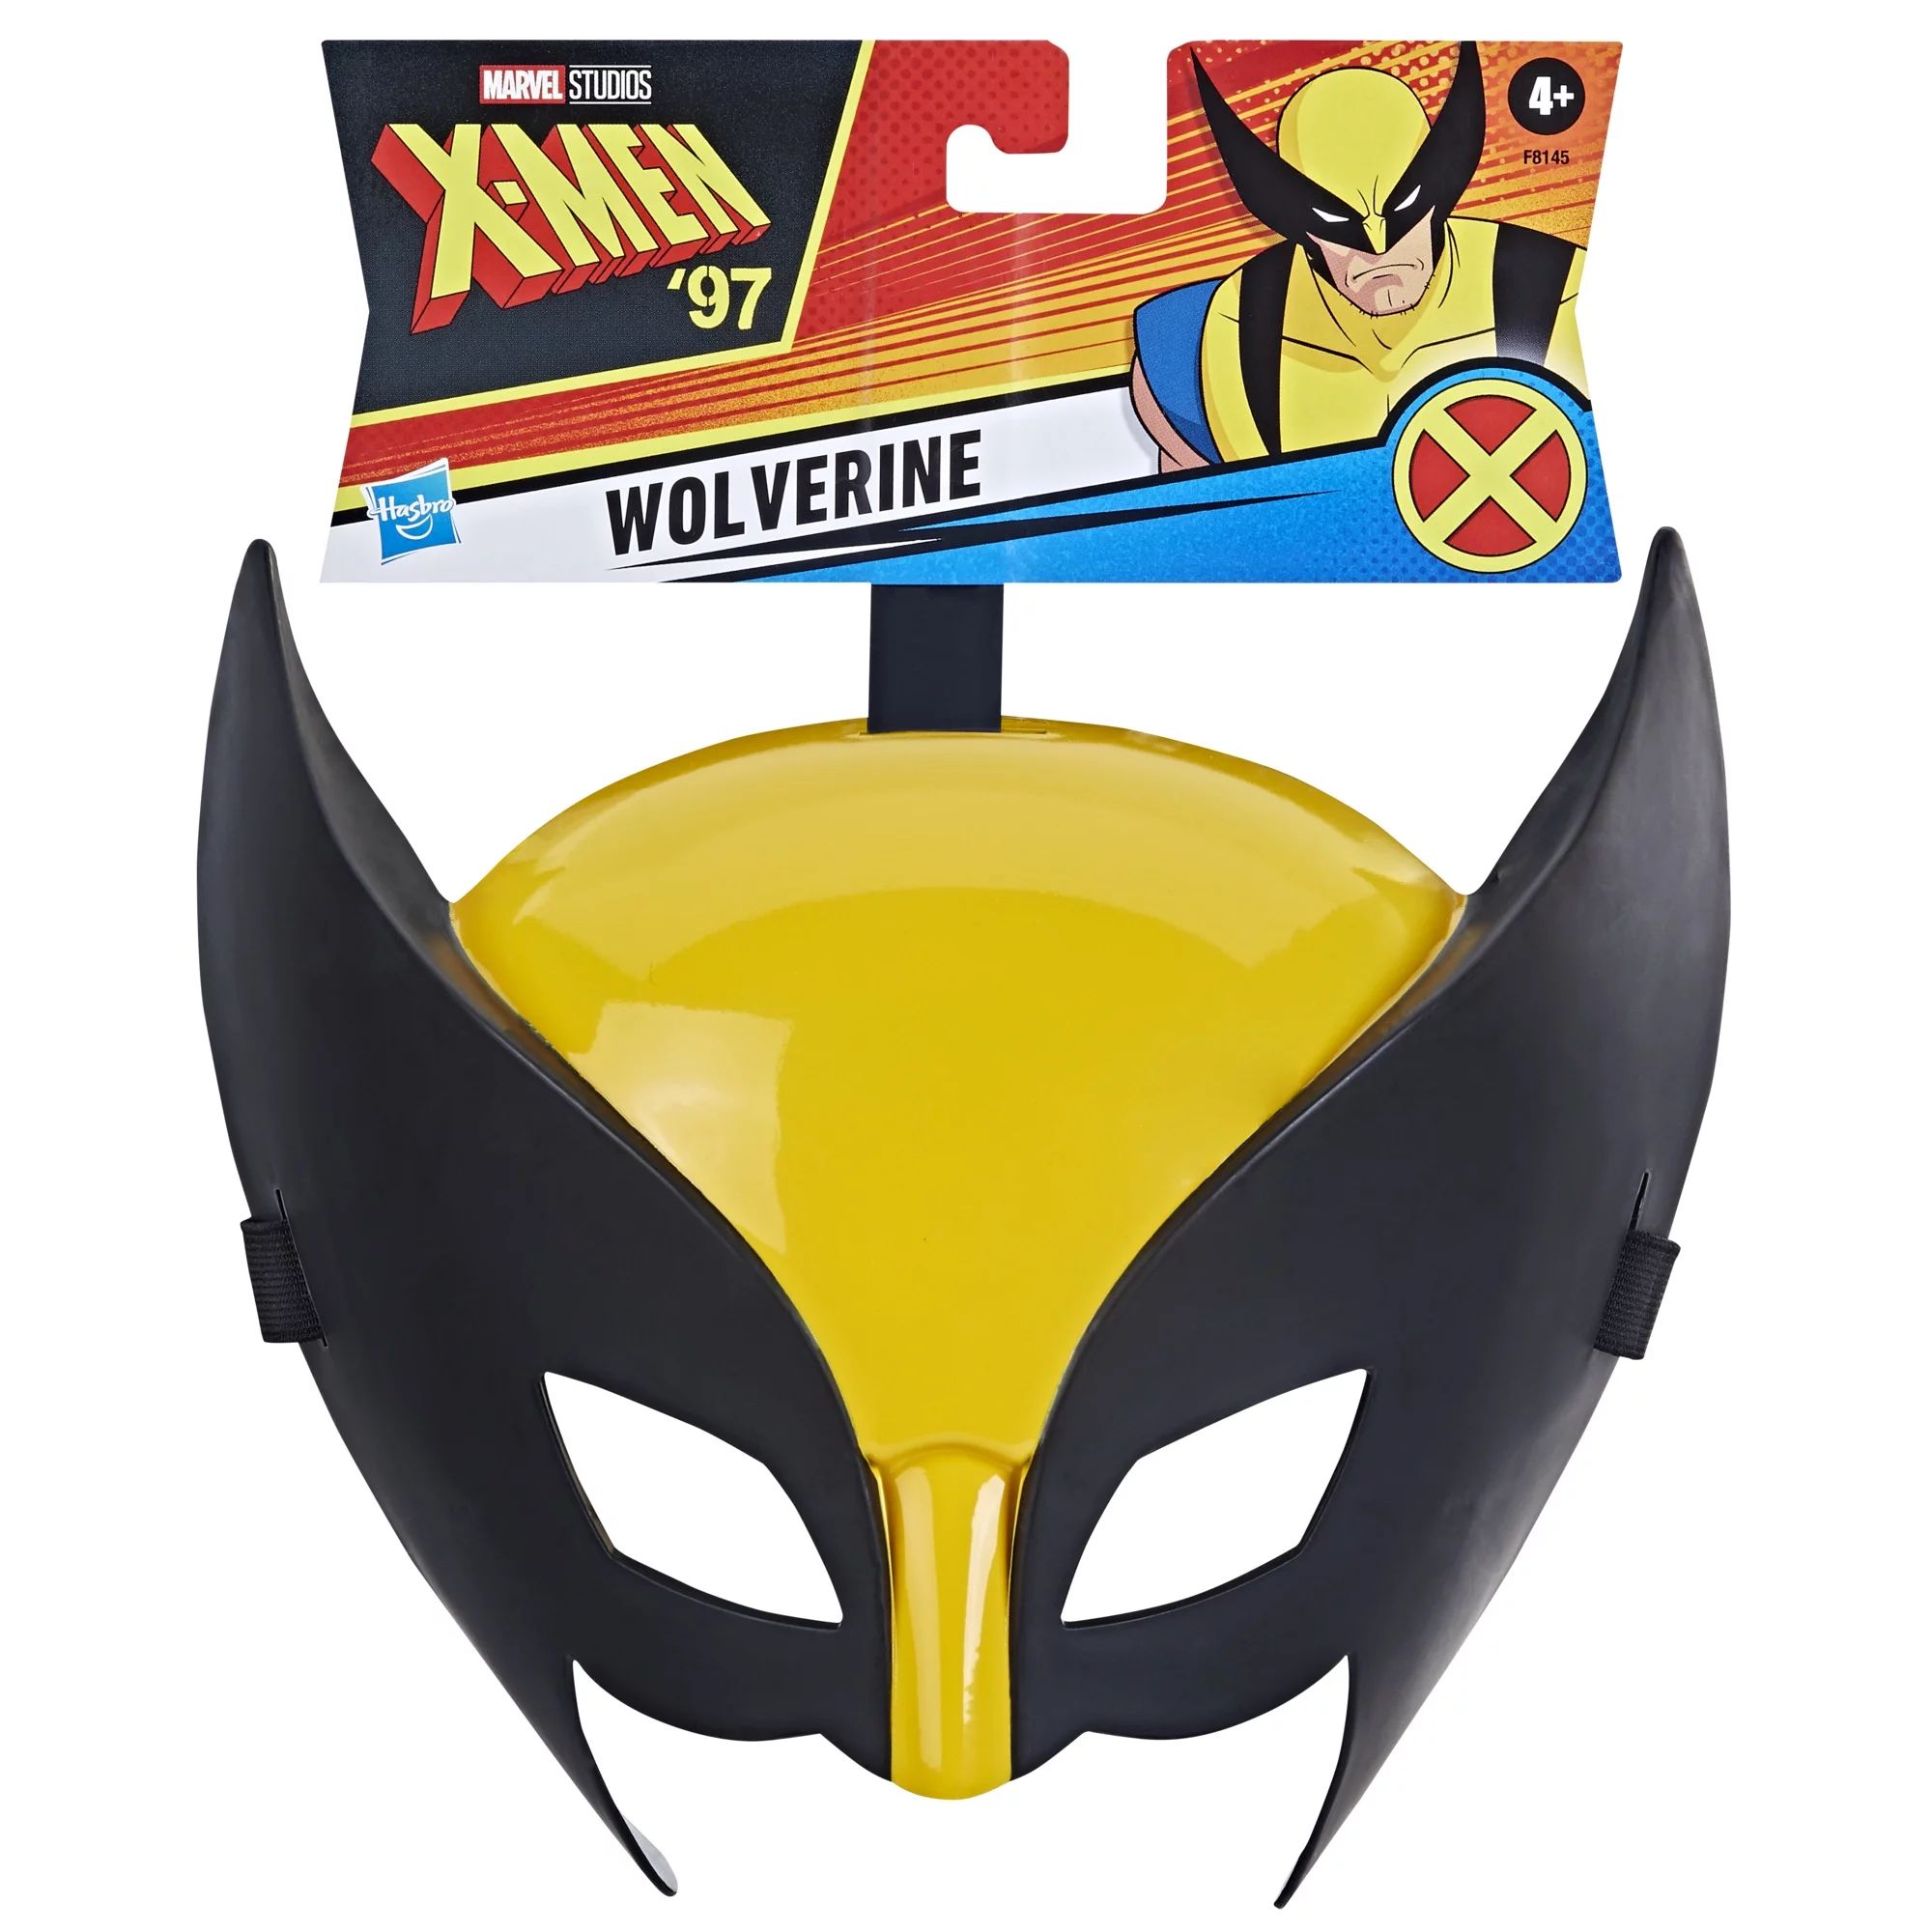 Marvel X-Men Wolverine Role Play Super Hero Mask, Marvel Toys, Great for Halloween Costumes | Walmart (US)